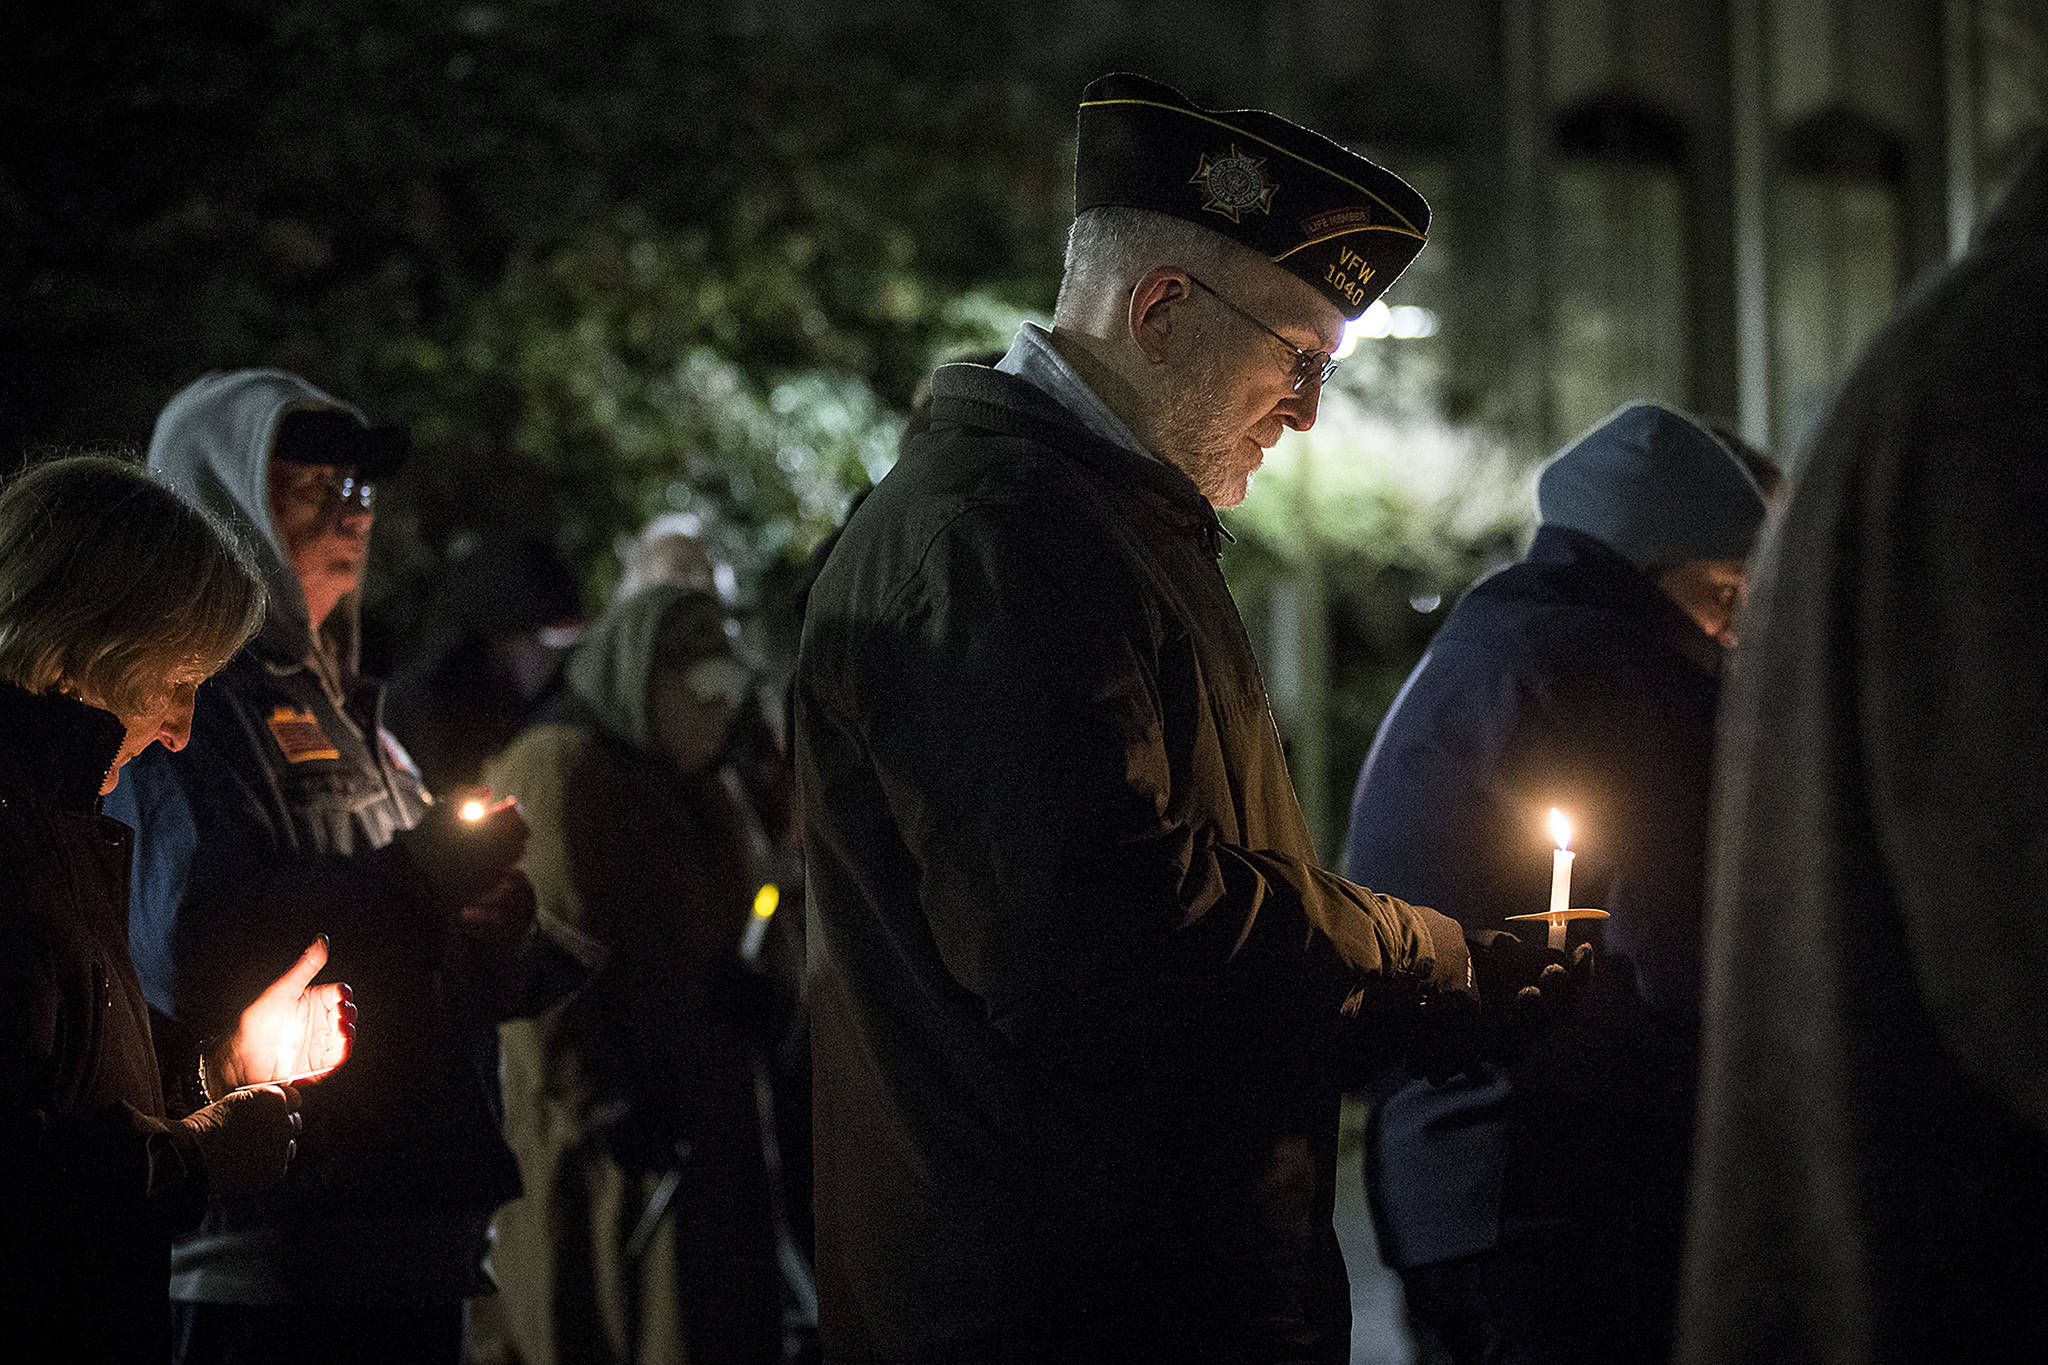 Army veteran Brian Seguin, of Everett, holds a candle at a vigil outside the Snohomish County Courthouse in Everett on Thursday in remembrance of deaths this year within the area’s homeless population. The annual vigil had a special emphasis on homeless veterans and the difficulties they face. (Ian Terry / The Herald)